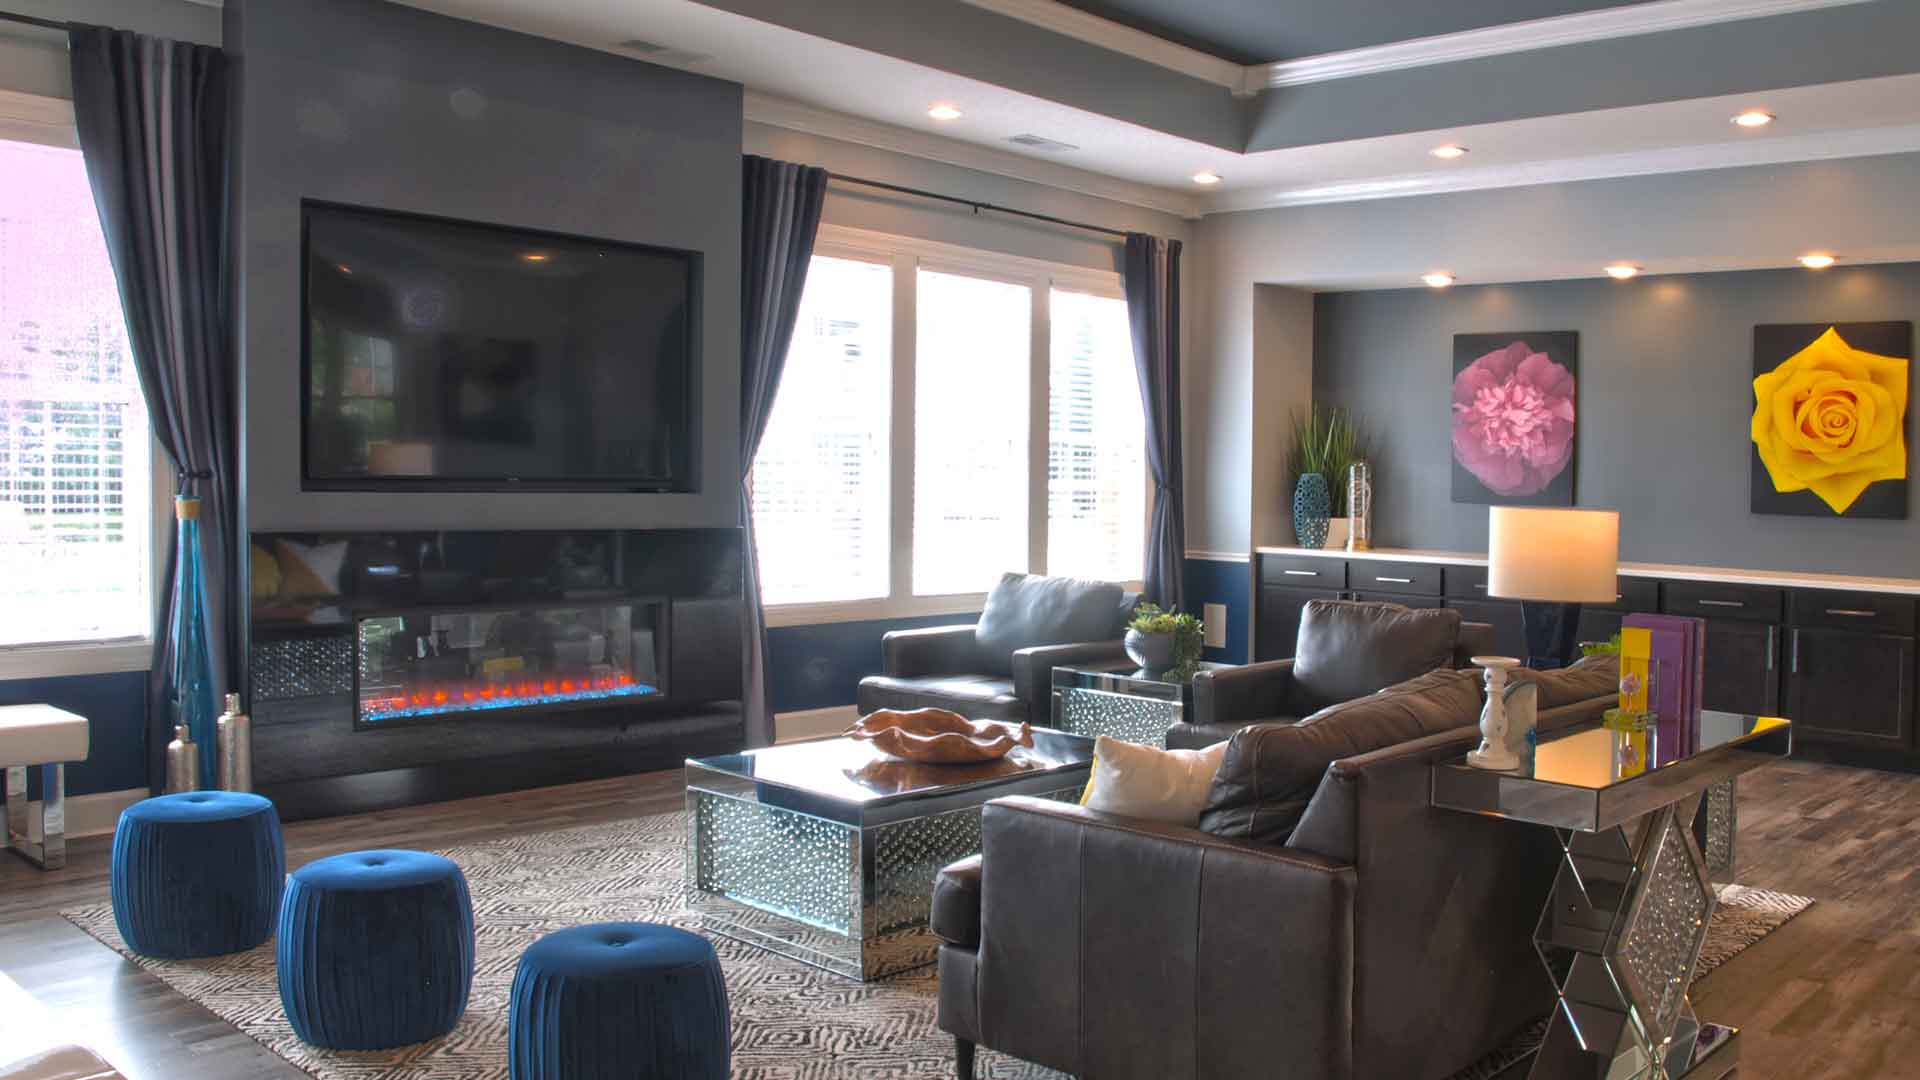 Furnished and decorated clubhouse with electric fireplace and flat screen TV.